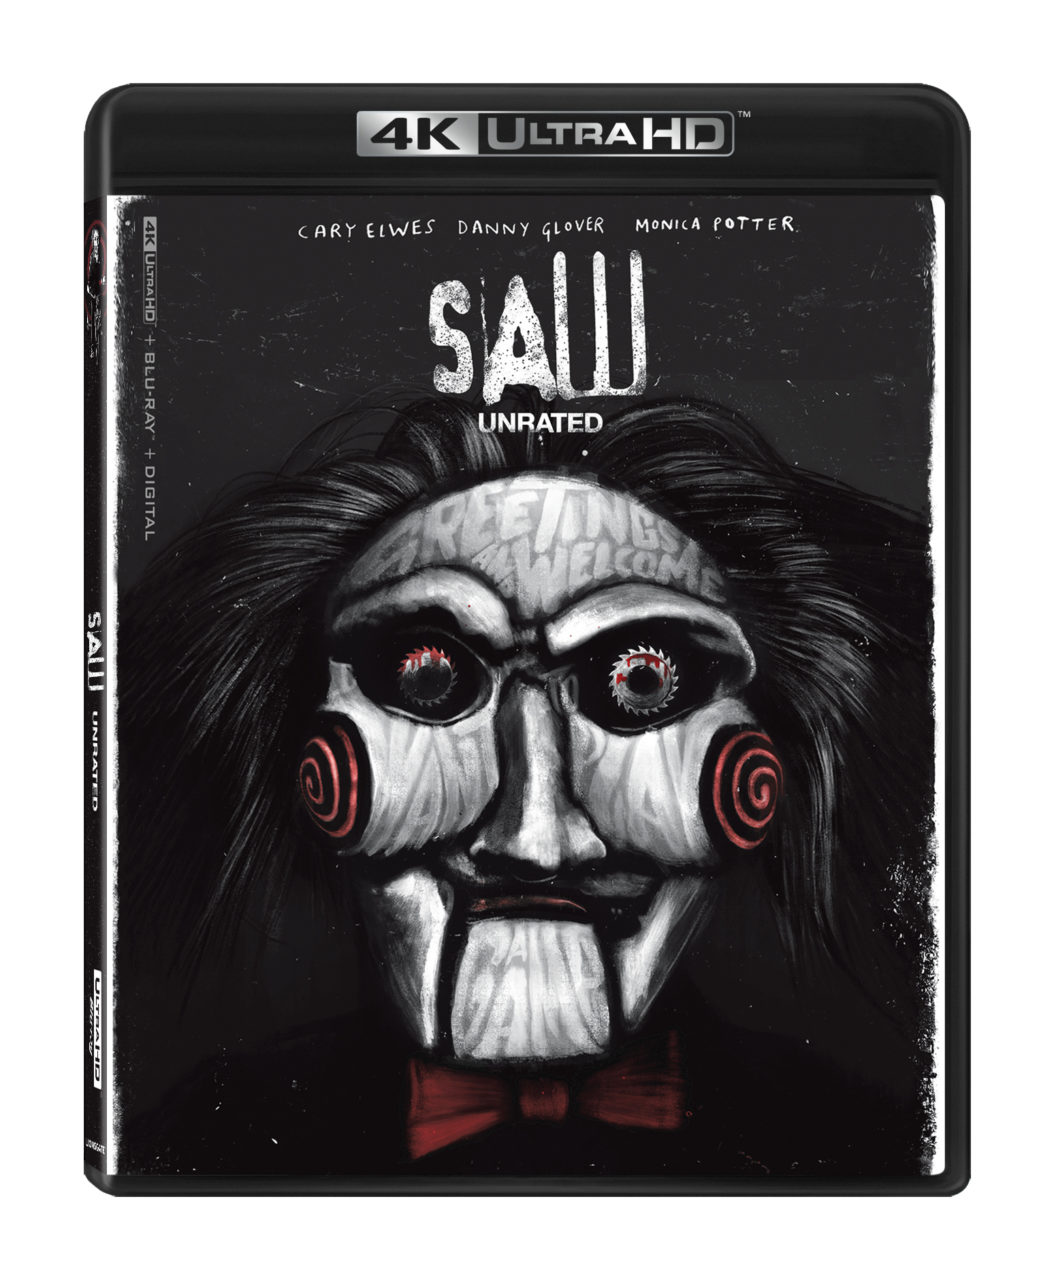 Saw Unrated 4K Ultra HD cover (Lionsgate)